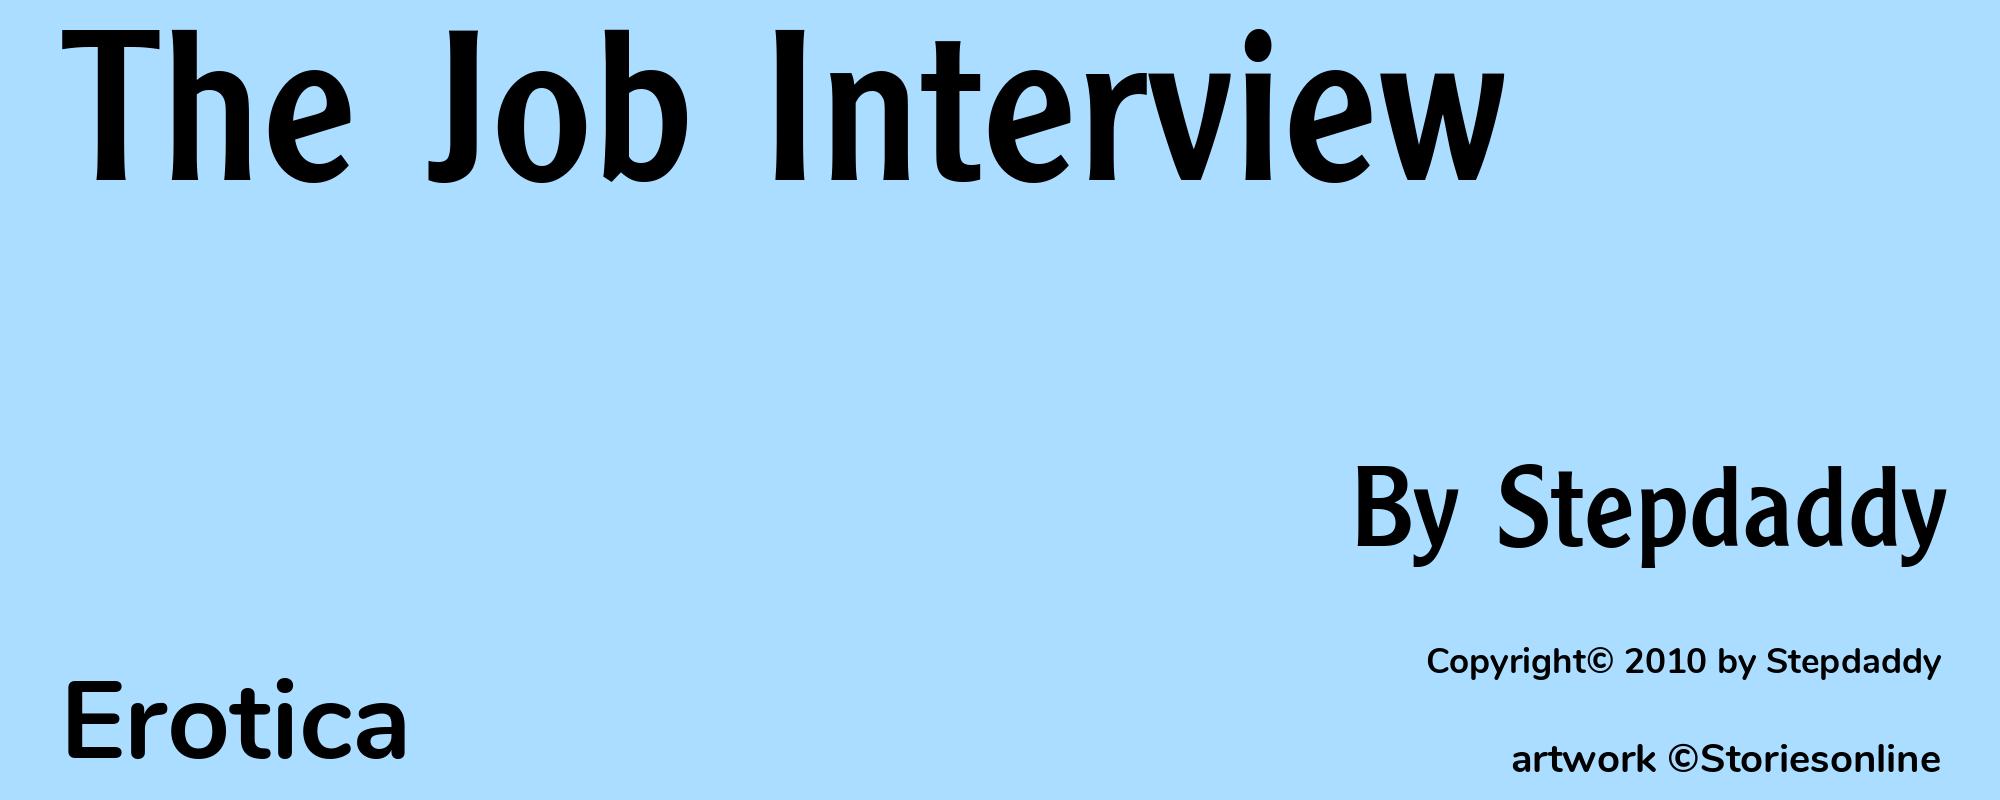 The Job Interview - Cover